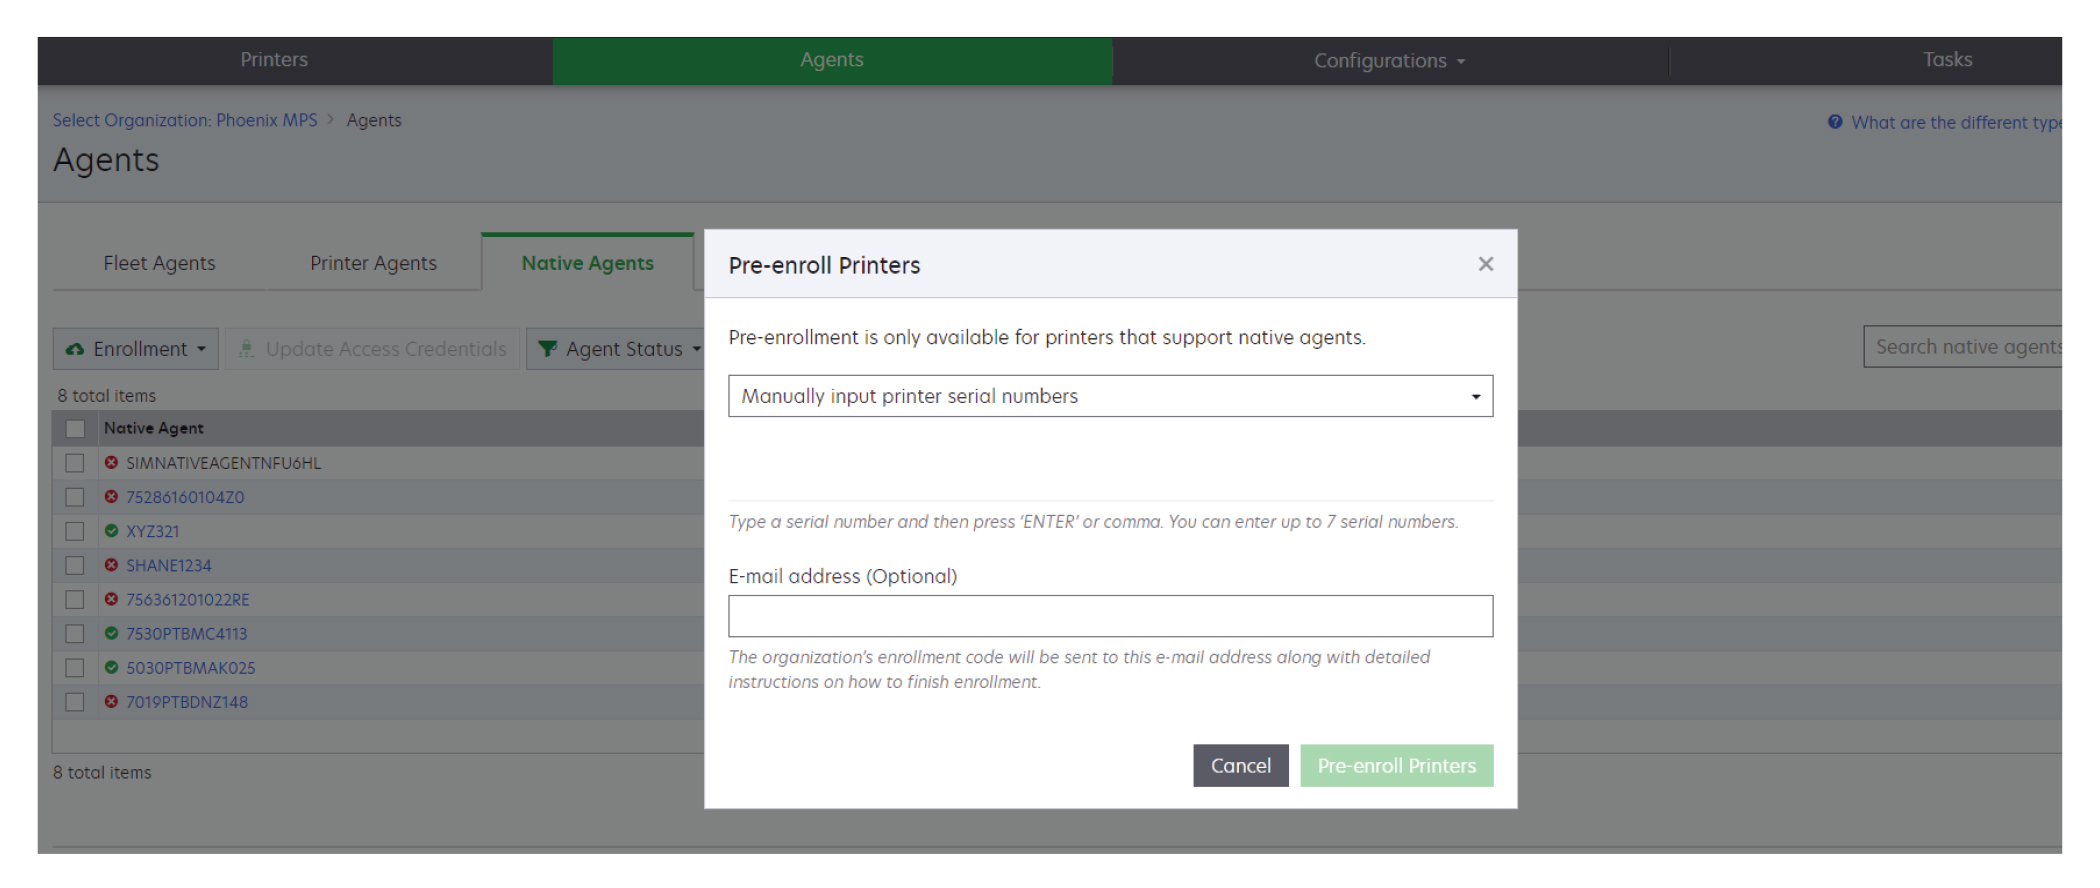 A screenshot showing how to pre-enroll a printer using the Native Agent.